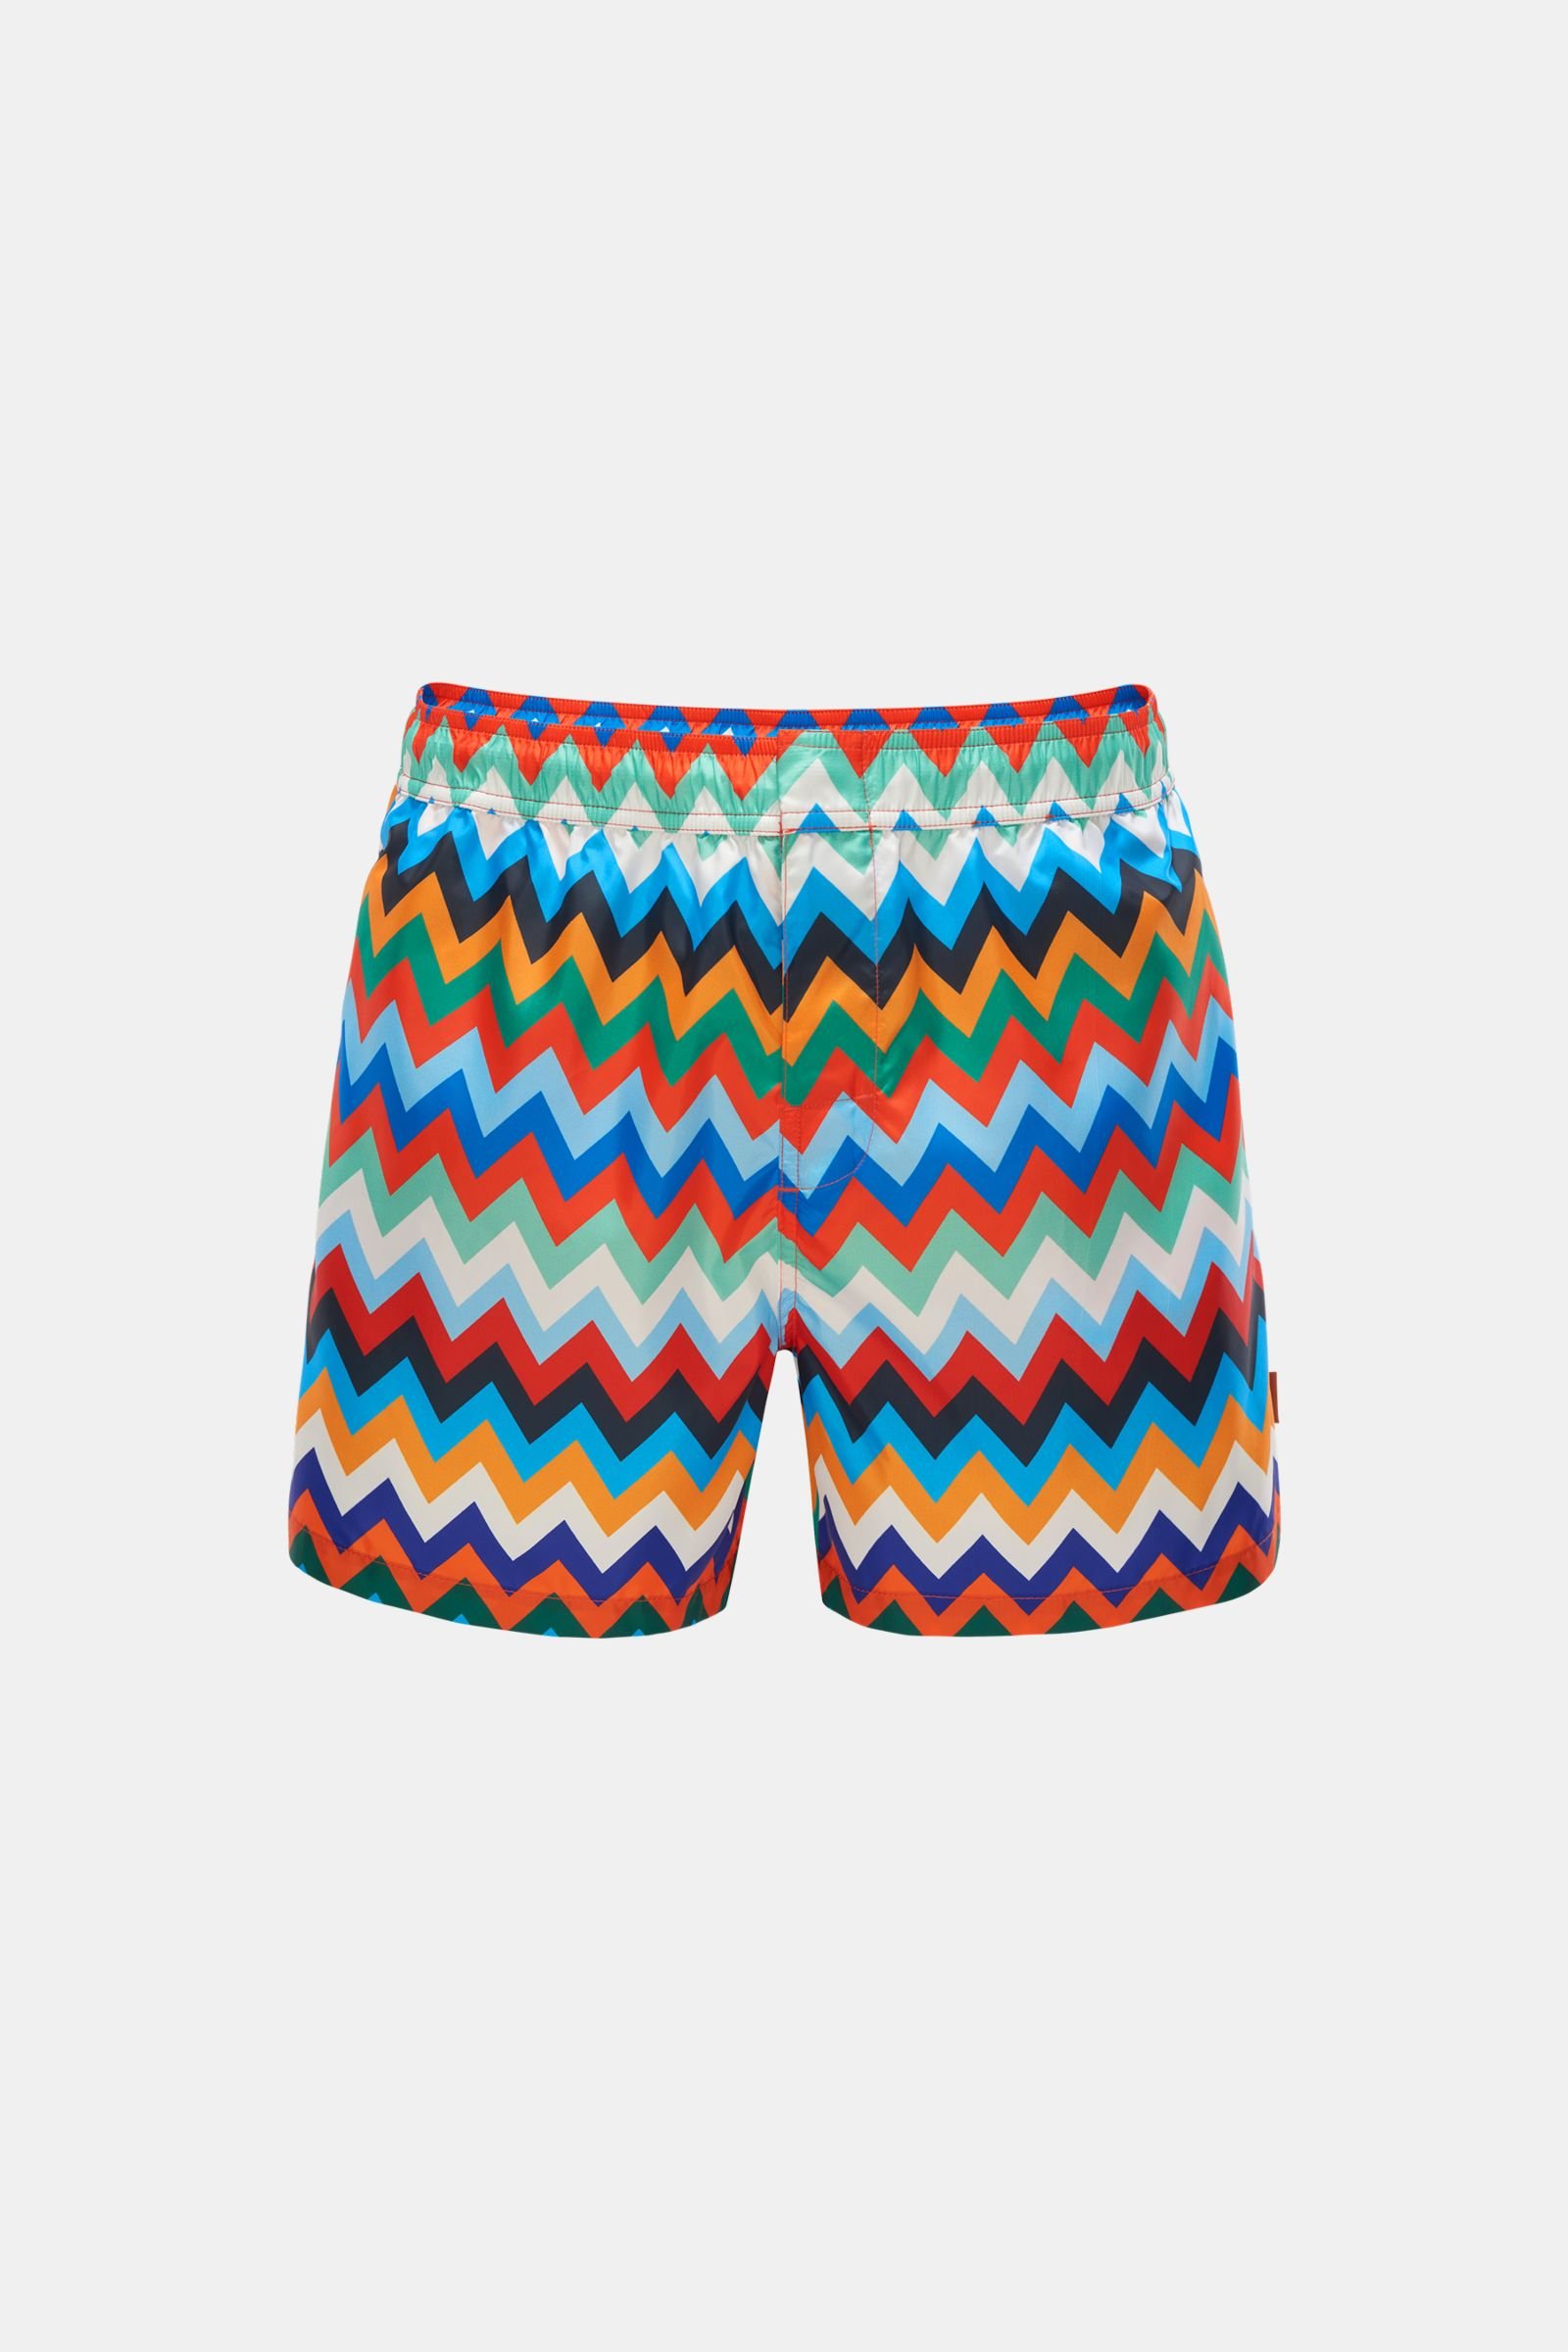 Swim shorts red/blue patterned